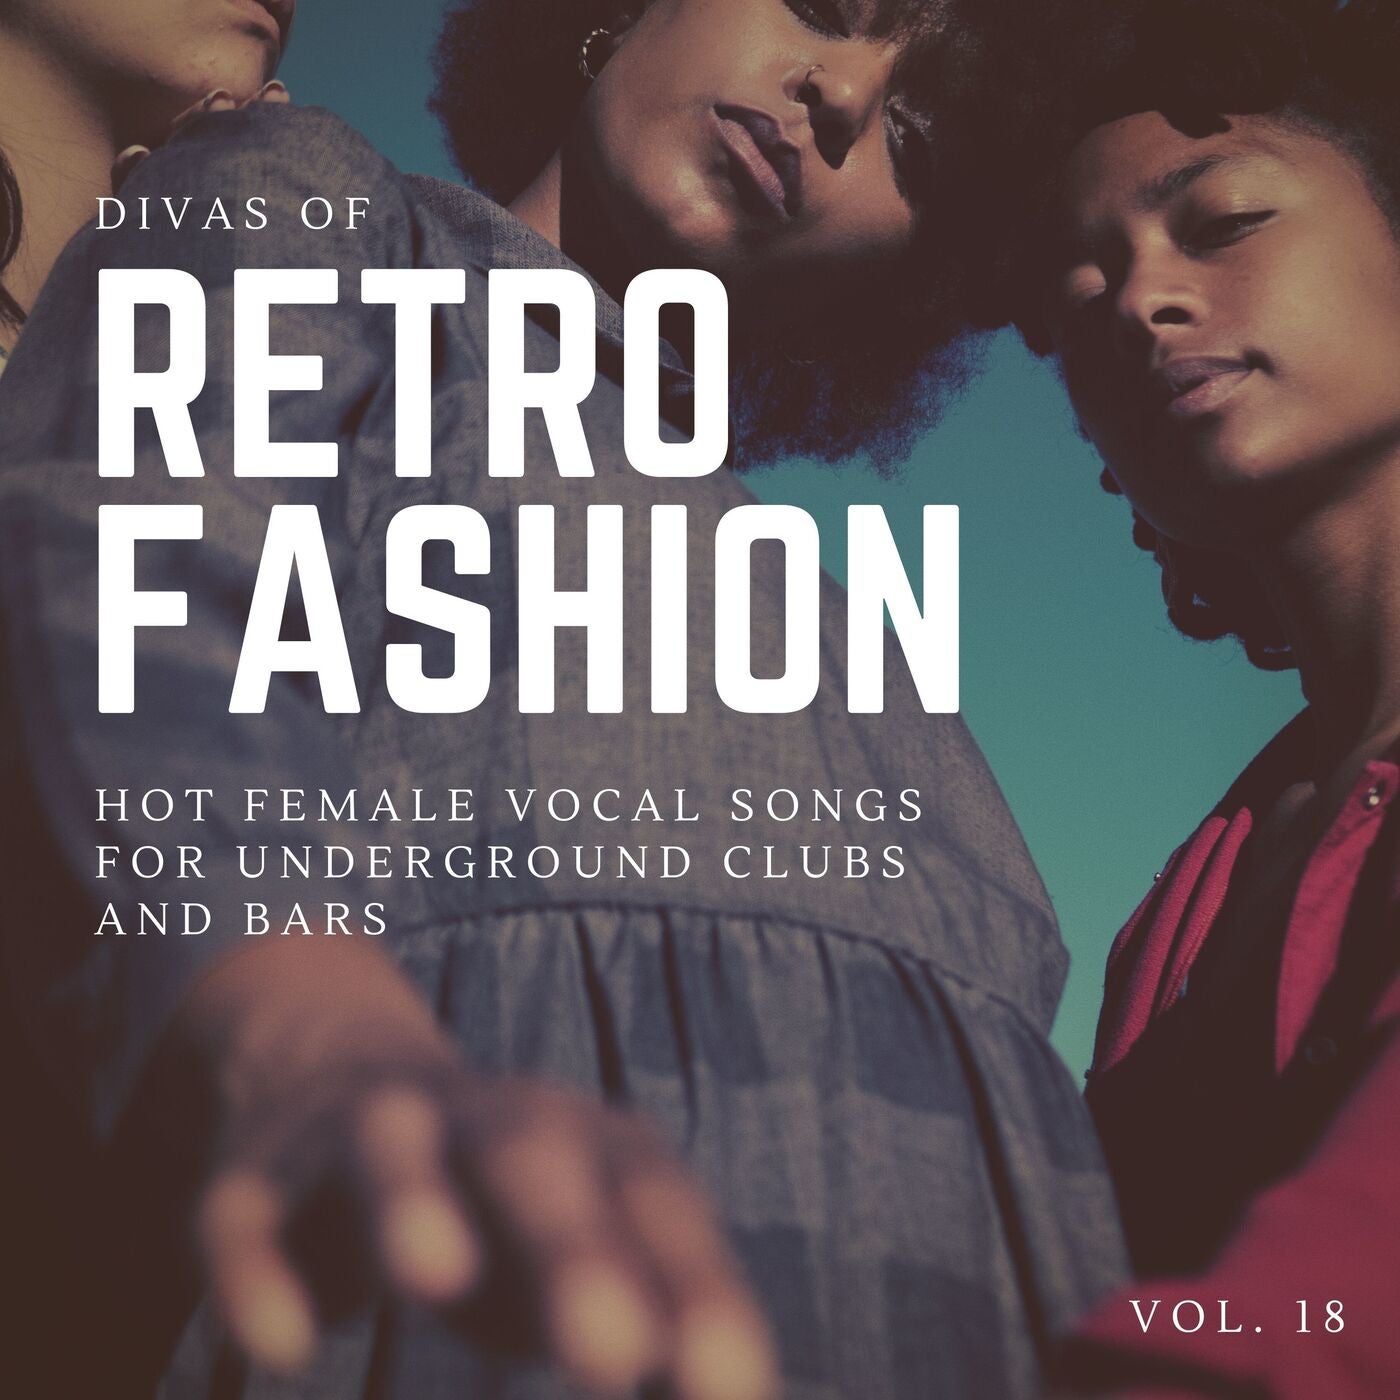 Divas Of Retro Fashion - Hot Female Vocal Songs For Underground Clubs And Bars, Vol. 18